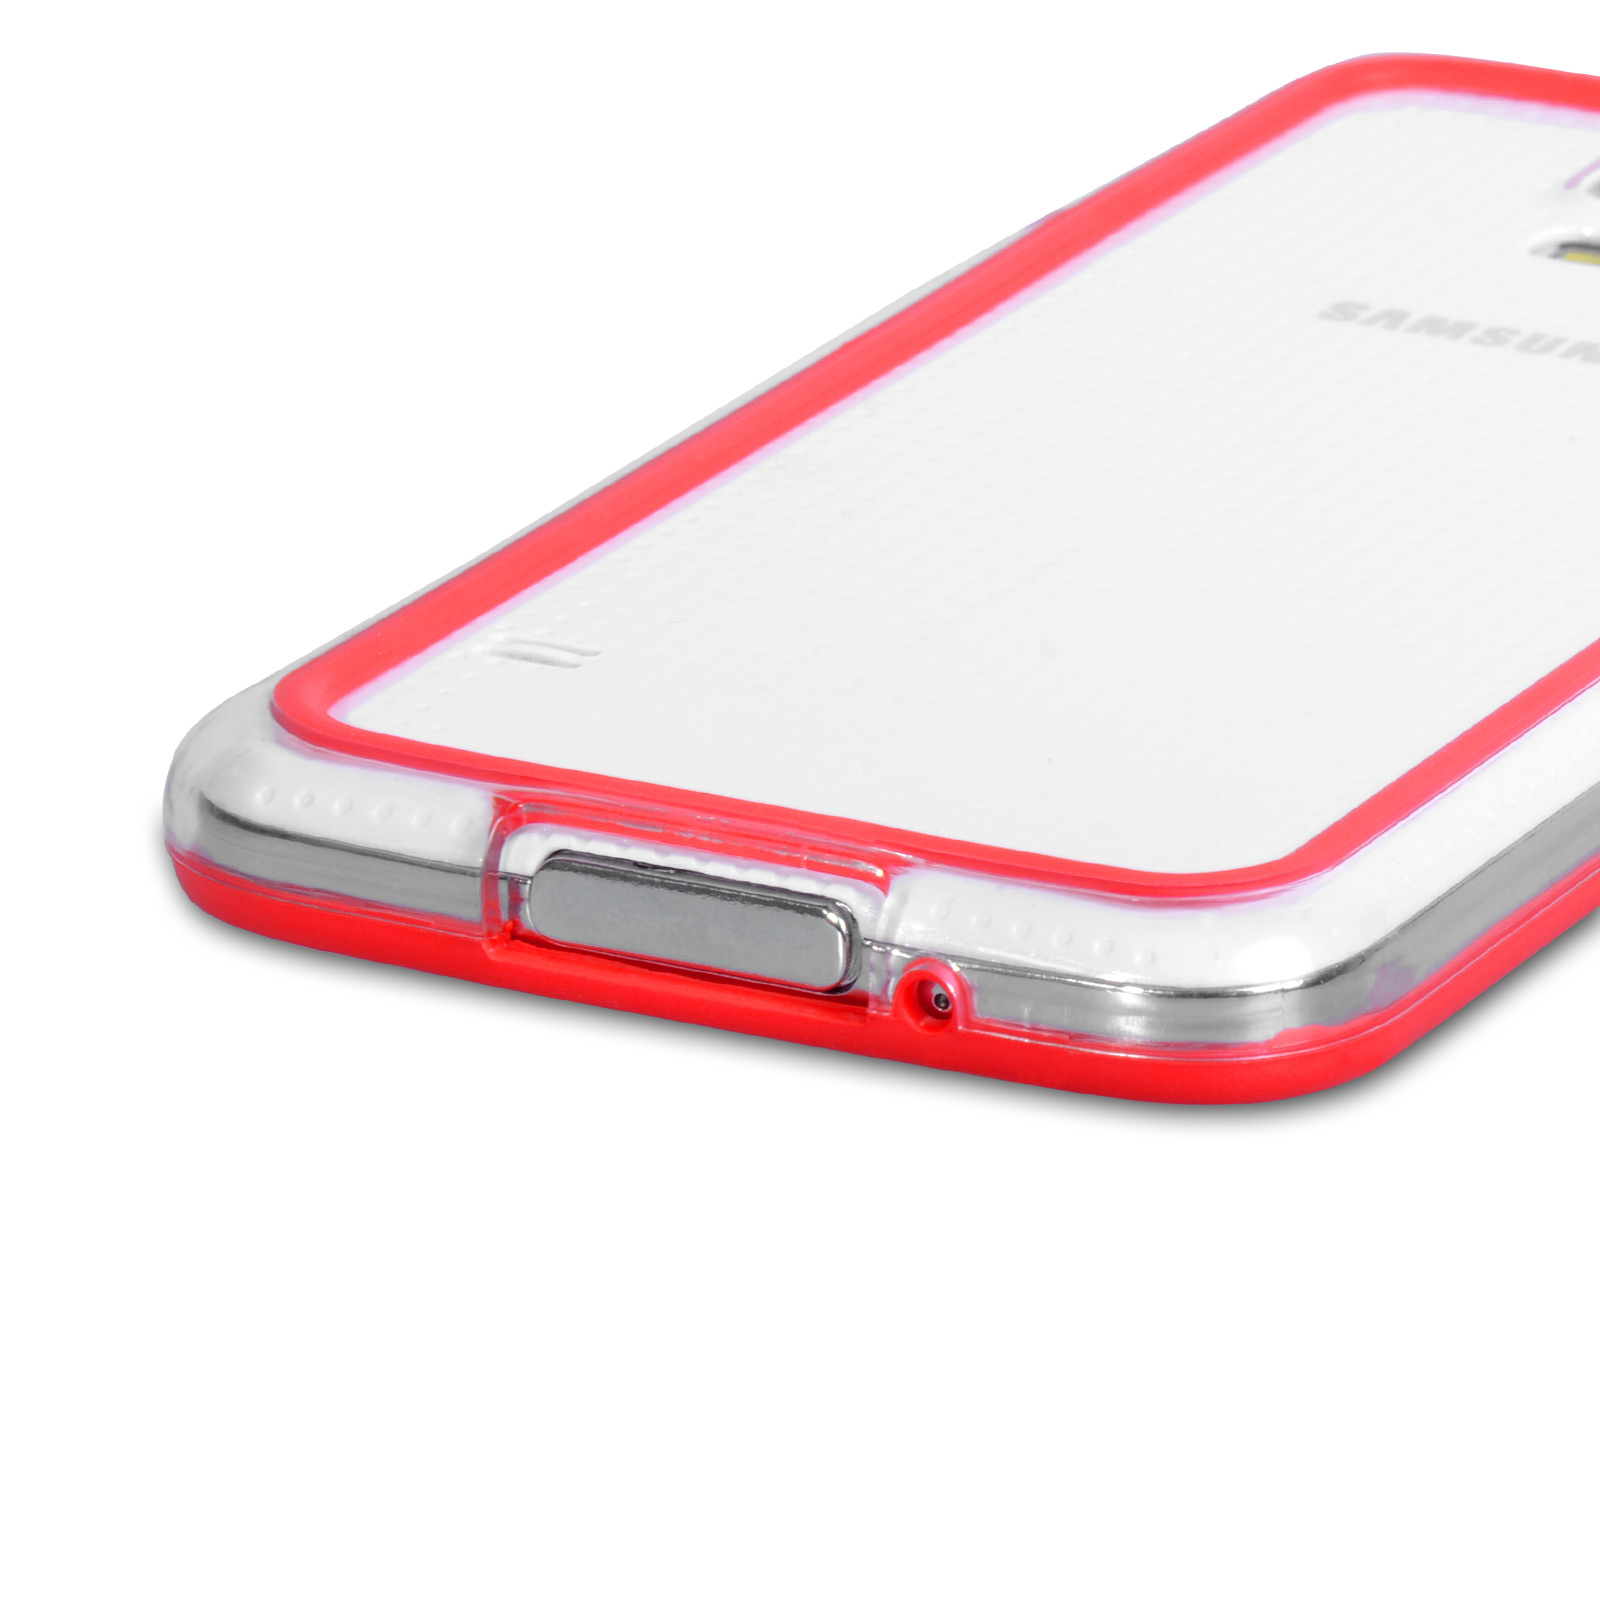 YouSave Accessories Samsung Galaxy S5 Bumper Case - Clear/Red